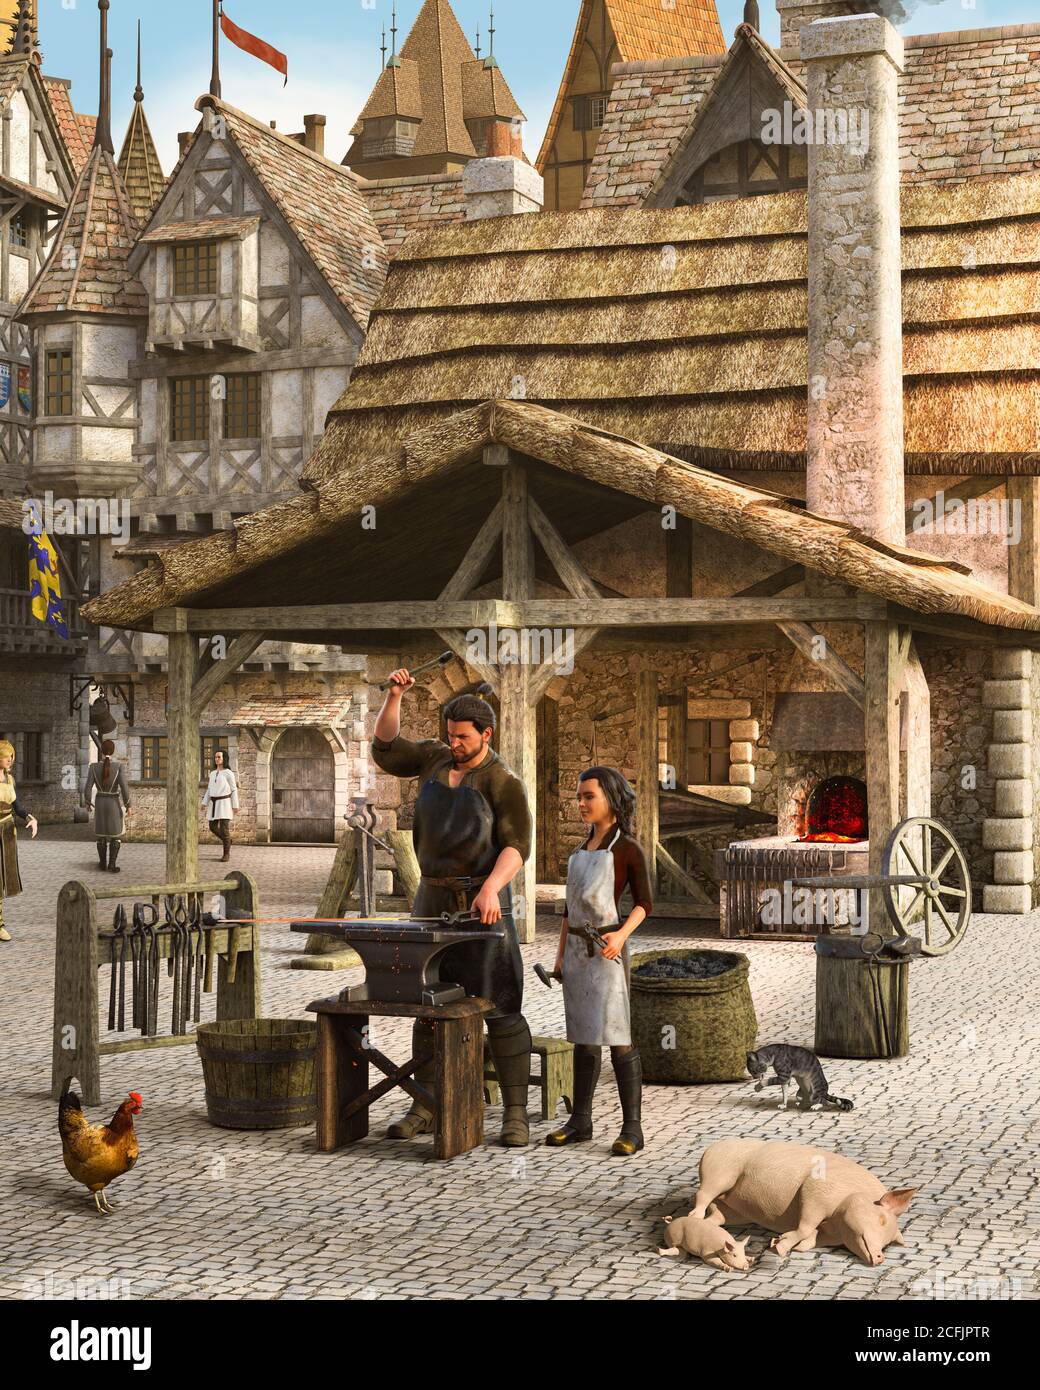 Blacksmith at work outside his shop in a medieval European town, 3d